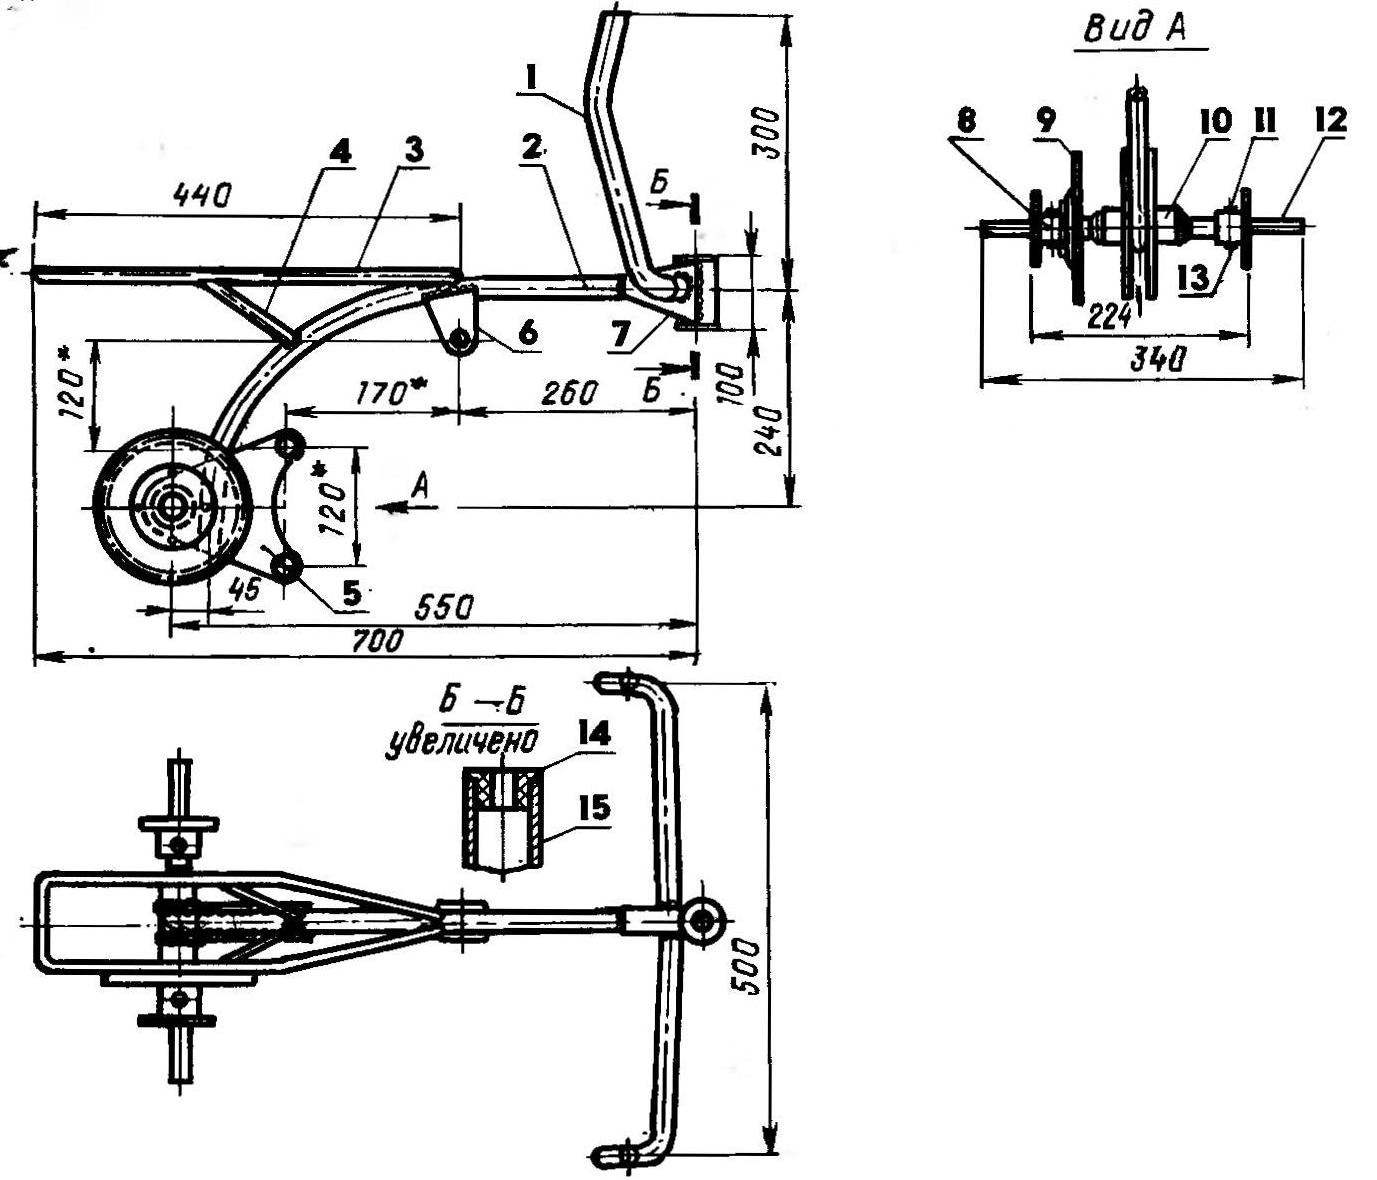 Fig. 3. The frame of the power unit